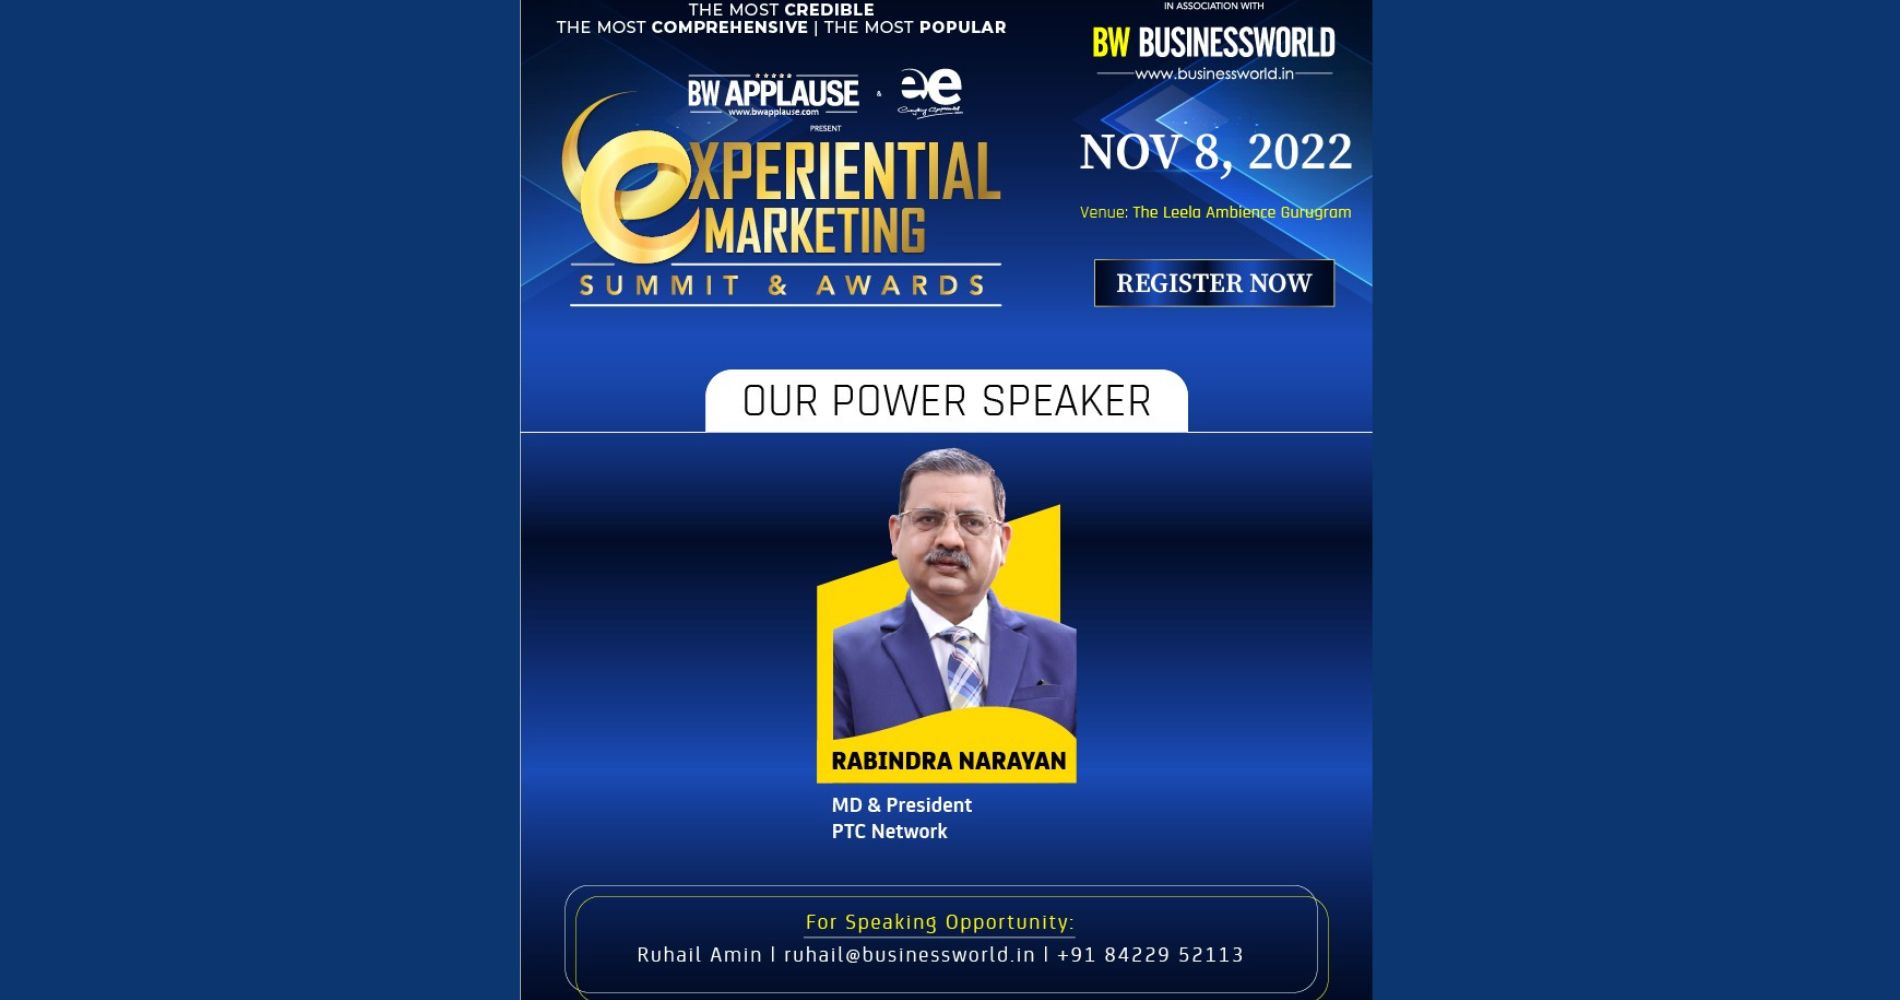 Rabindra Narayan, MD & President PTC Network to deliver keynote